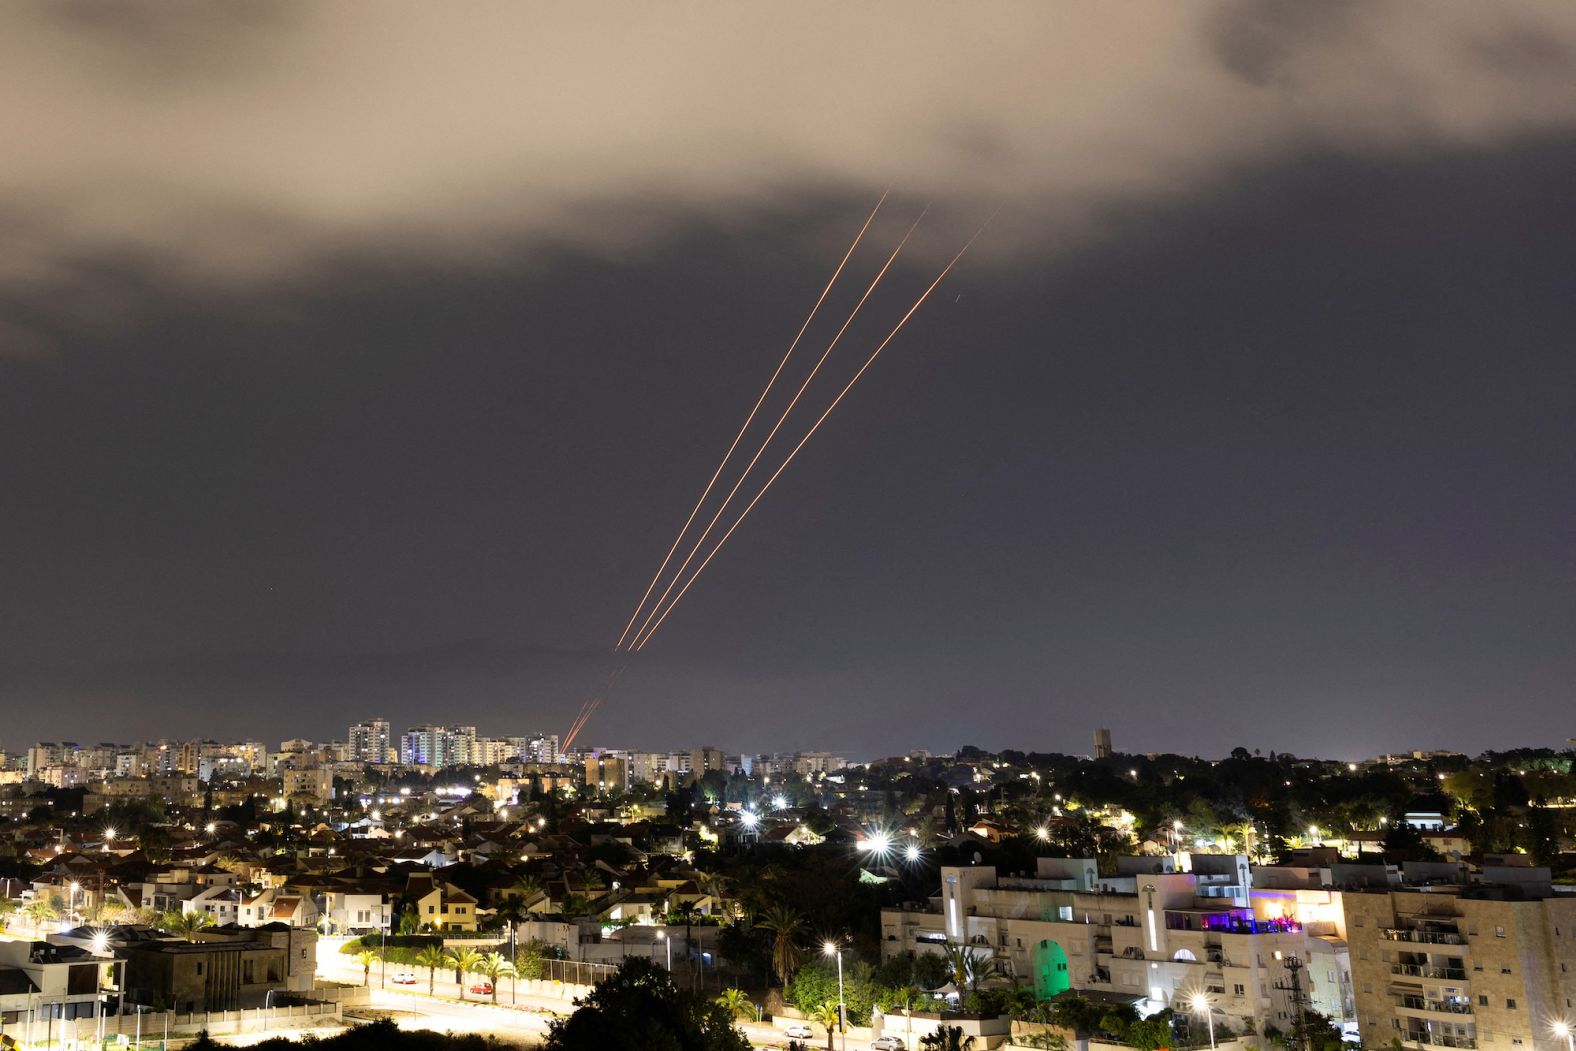 An anti-missile system, as seen from Ashkelon, Israel, operates early Sunday, April 14, after Iran launched an unprecedented <a href="https://www.cnn.com/2024/04/13/middleeast/iran-drones-attack-israel-intl-latam/index.html" target="_blank">large-scale drone and missile attack</a> at Israel. Iran attacked late Saturday <a href="https://www.cnn.com/2024/04/14/middleeast/why-iran-attack-israel-intl/index.html" target="_blank">in retaliation for a suspected Israeli strike</a> on an Iranian diplomatic complex in Syria earlier this month. More than 300 projectiles were fired toward Israel, but "99%" of them were intercepted by Israel's aerial defense systems and its "partners," according to the Israeli military.